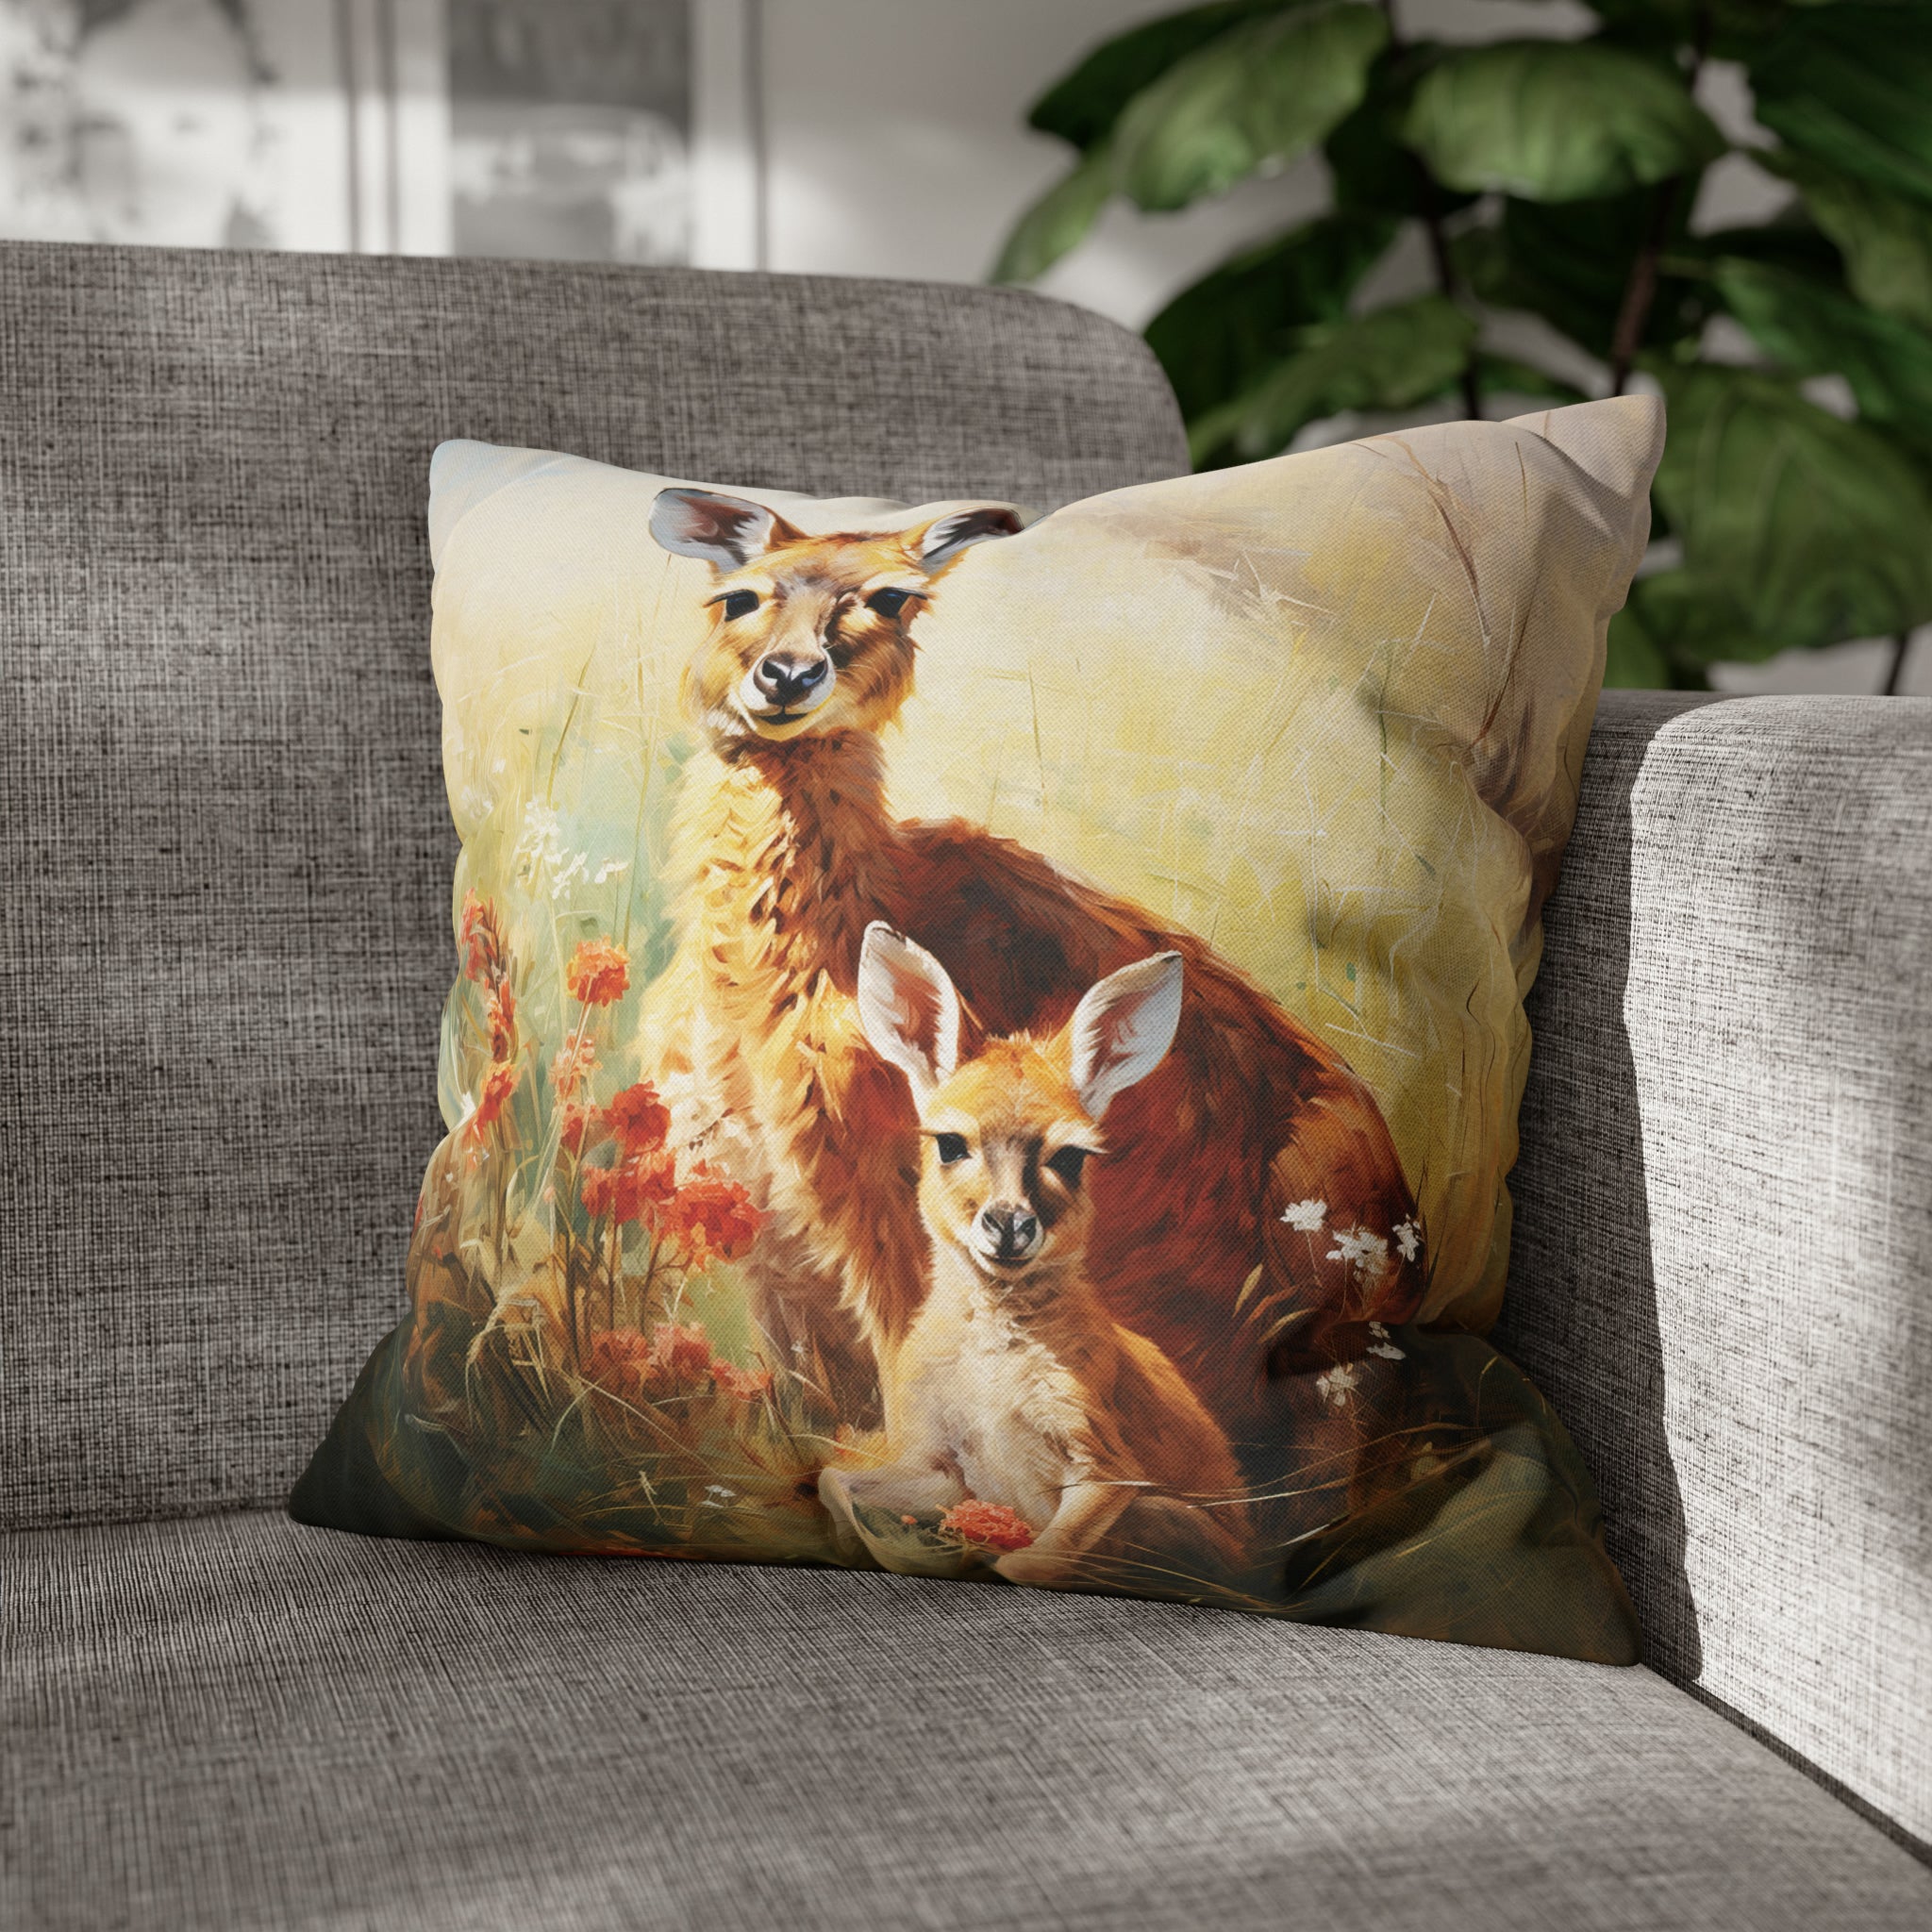 Square Pillow Case 18" x 18", CASE ONLY, no pillow form, original Art ,Colorful, a Mother Kangaroo with Her Joey in the Golden Grass with Flowers